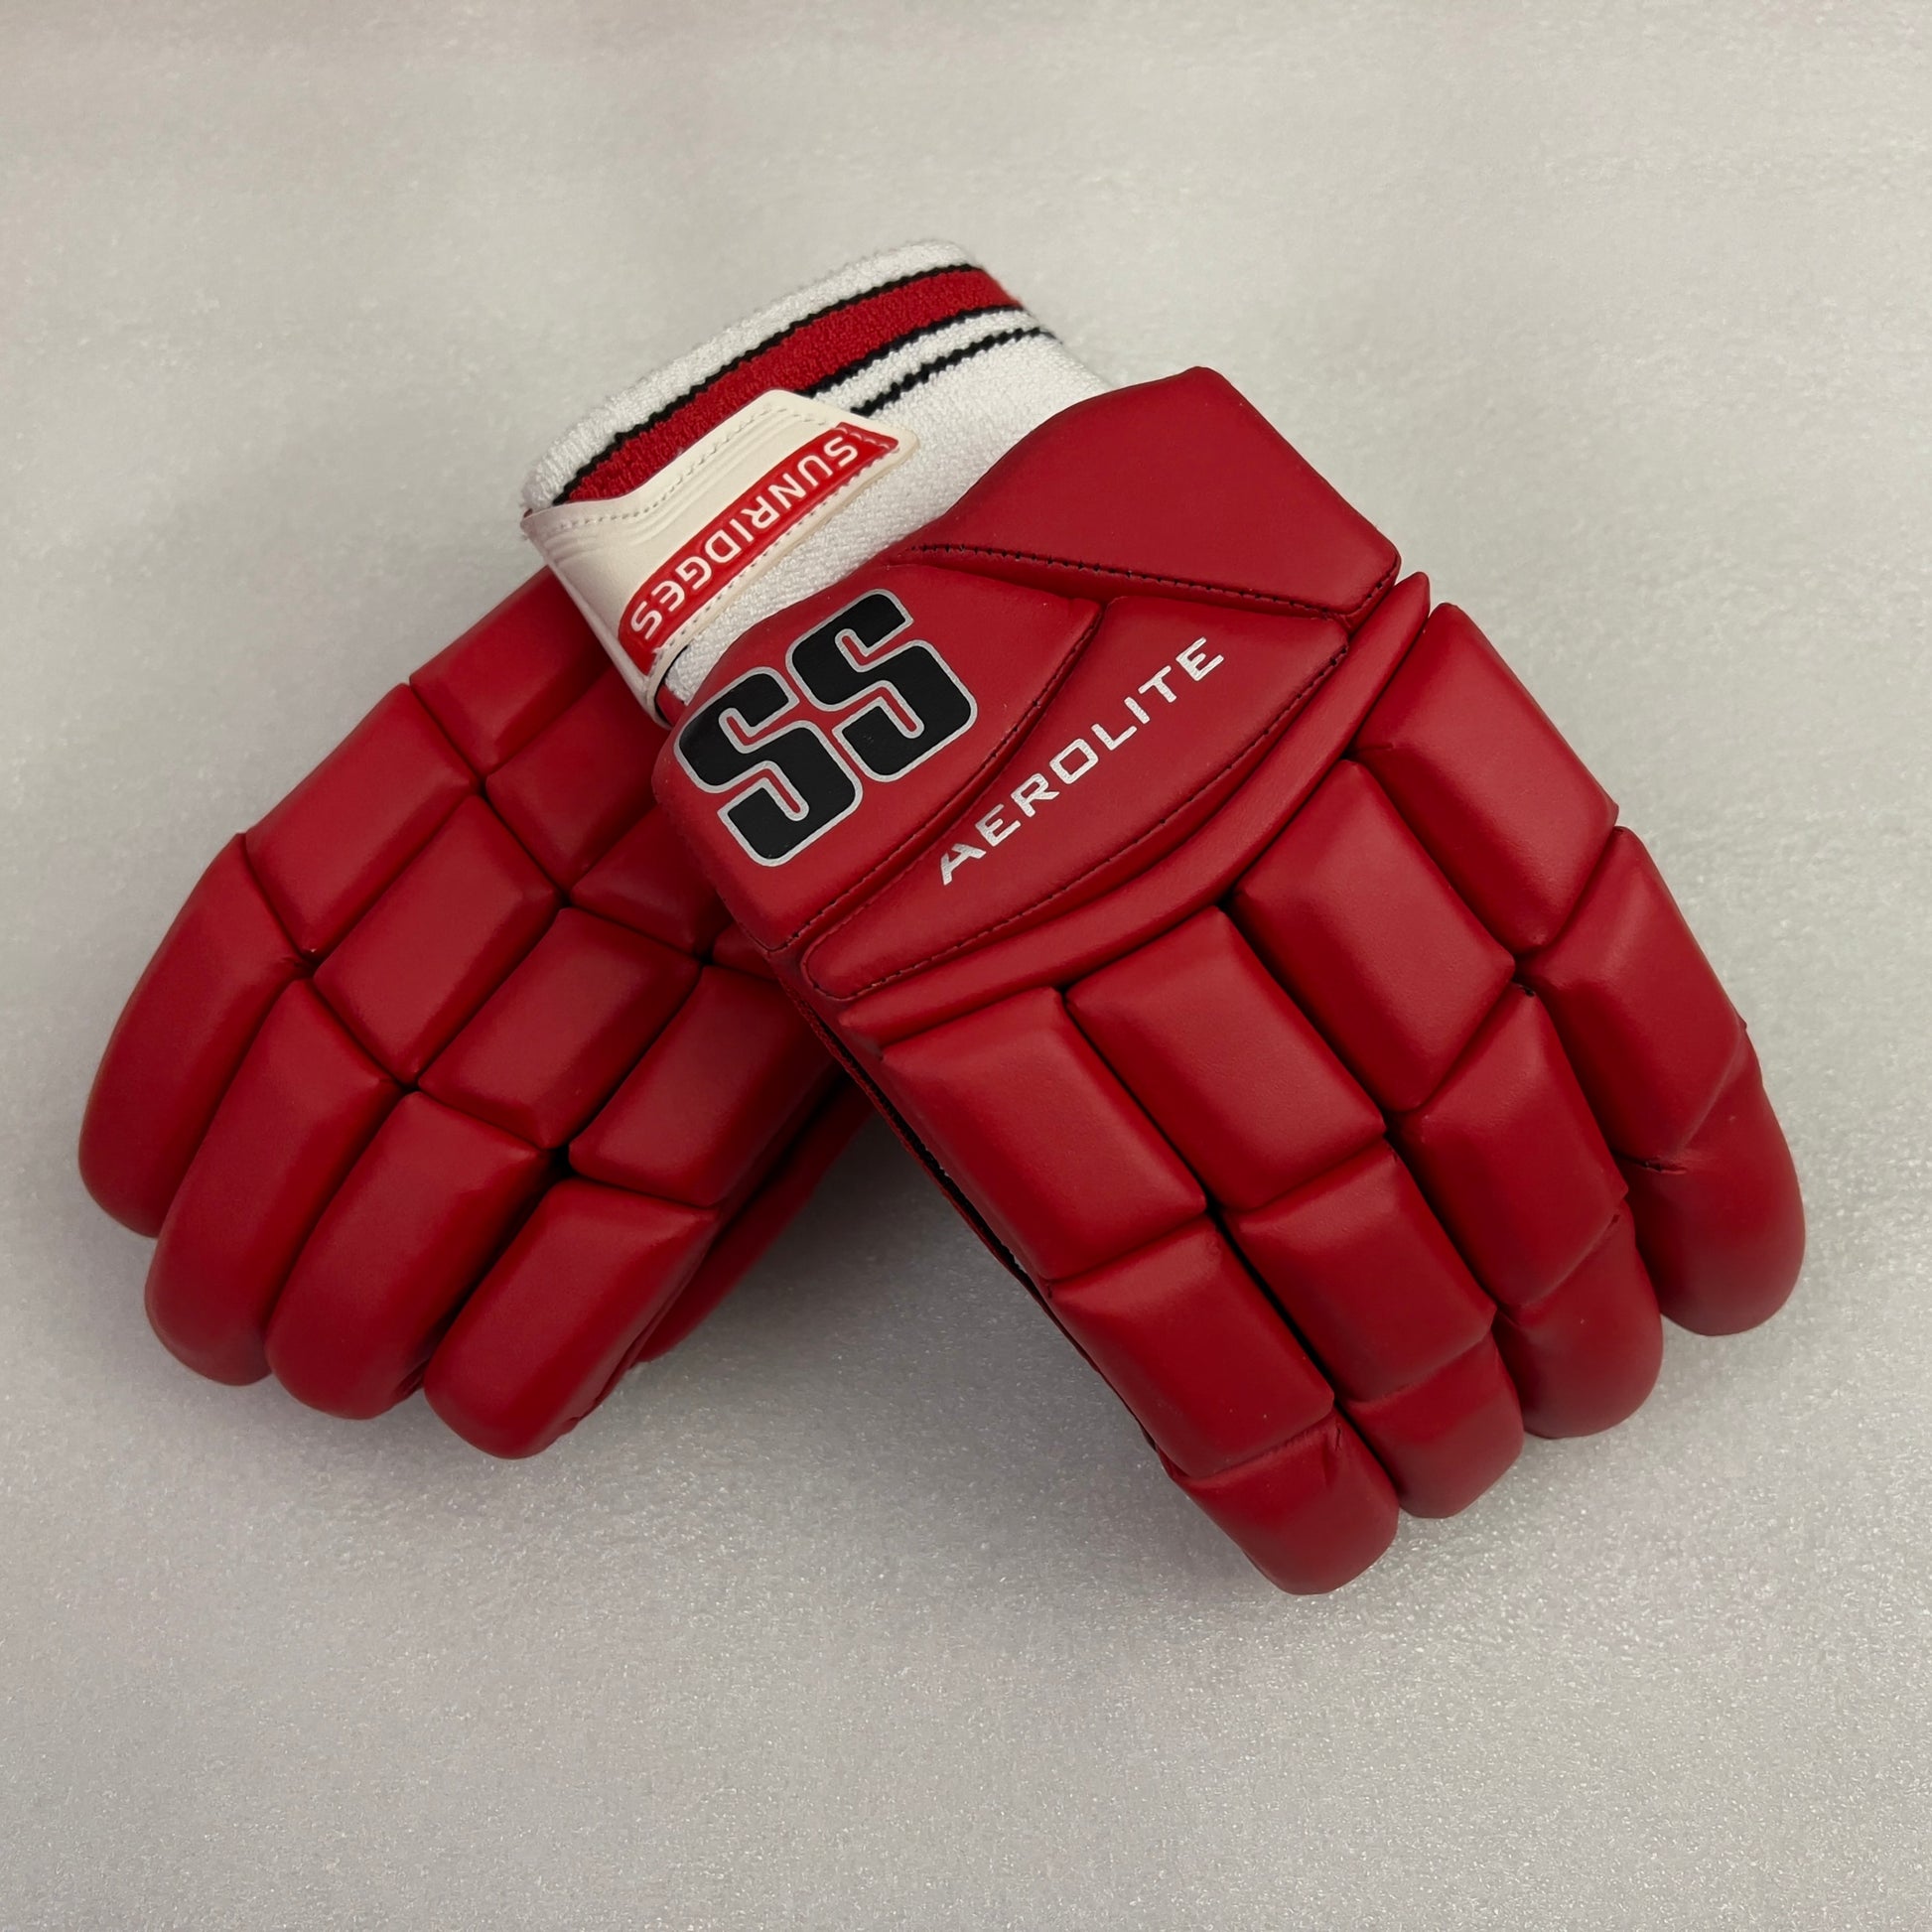 SS Aerolite Custom Cricket Batting Gloves, the highest quality for top-level play, extremely lightweight with real calf leather Pittard gloves, designed for flexible grip and maximum protection, with sweat absorbing wrist grip in men's size.